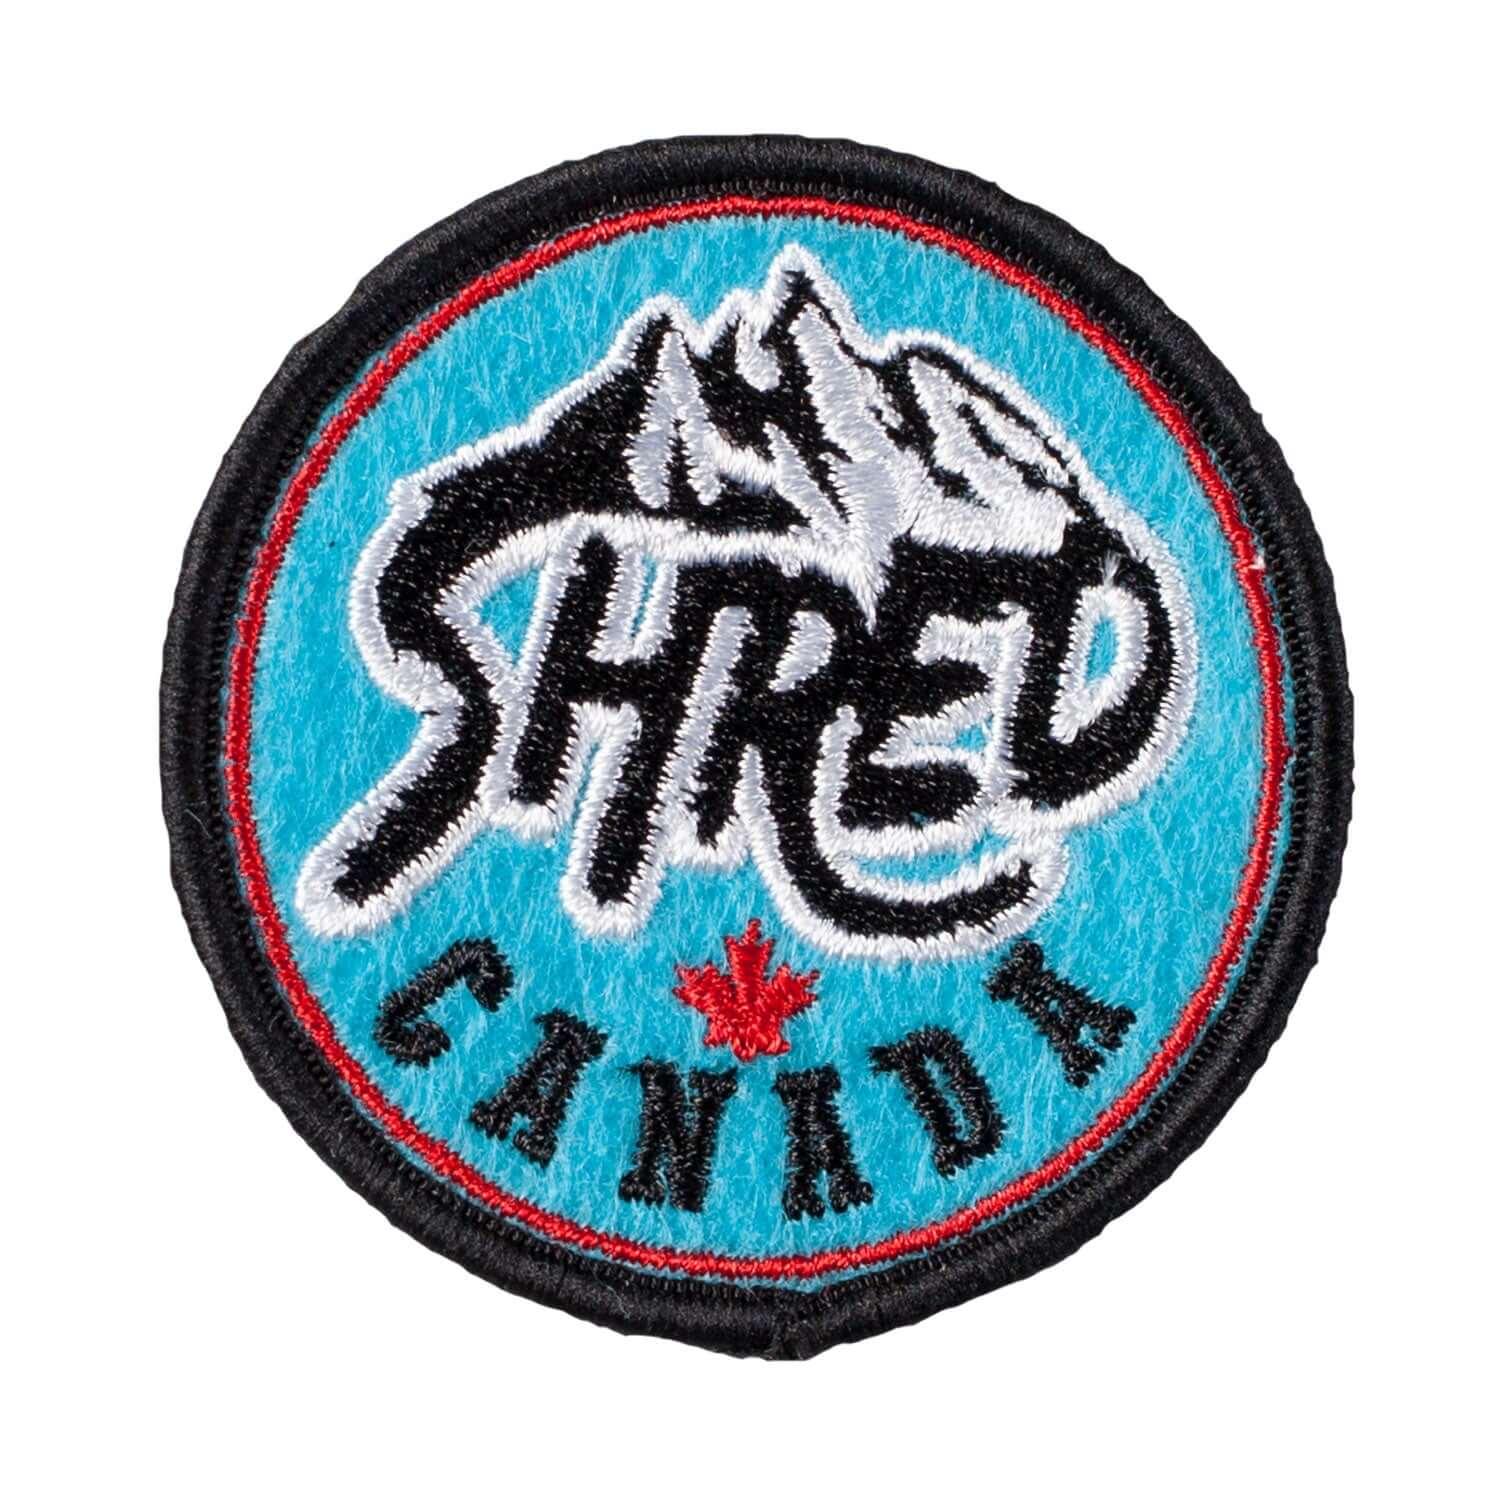 Shred Canada Iron On Patch - Rocket Factory Apparel